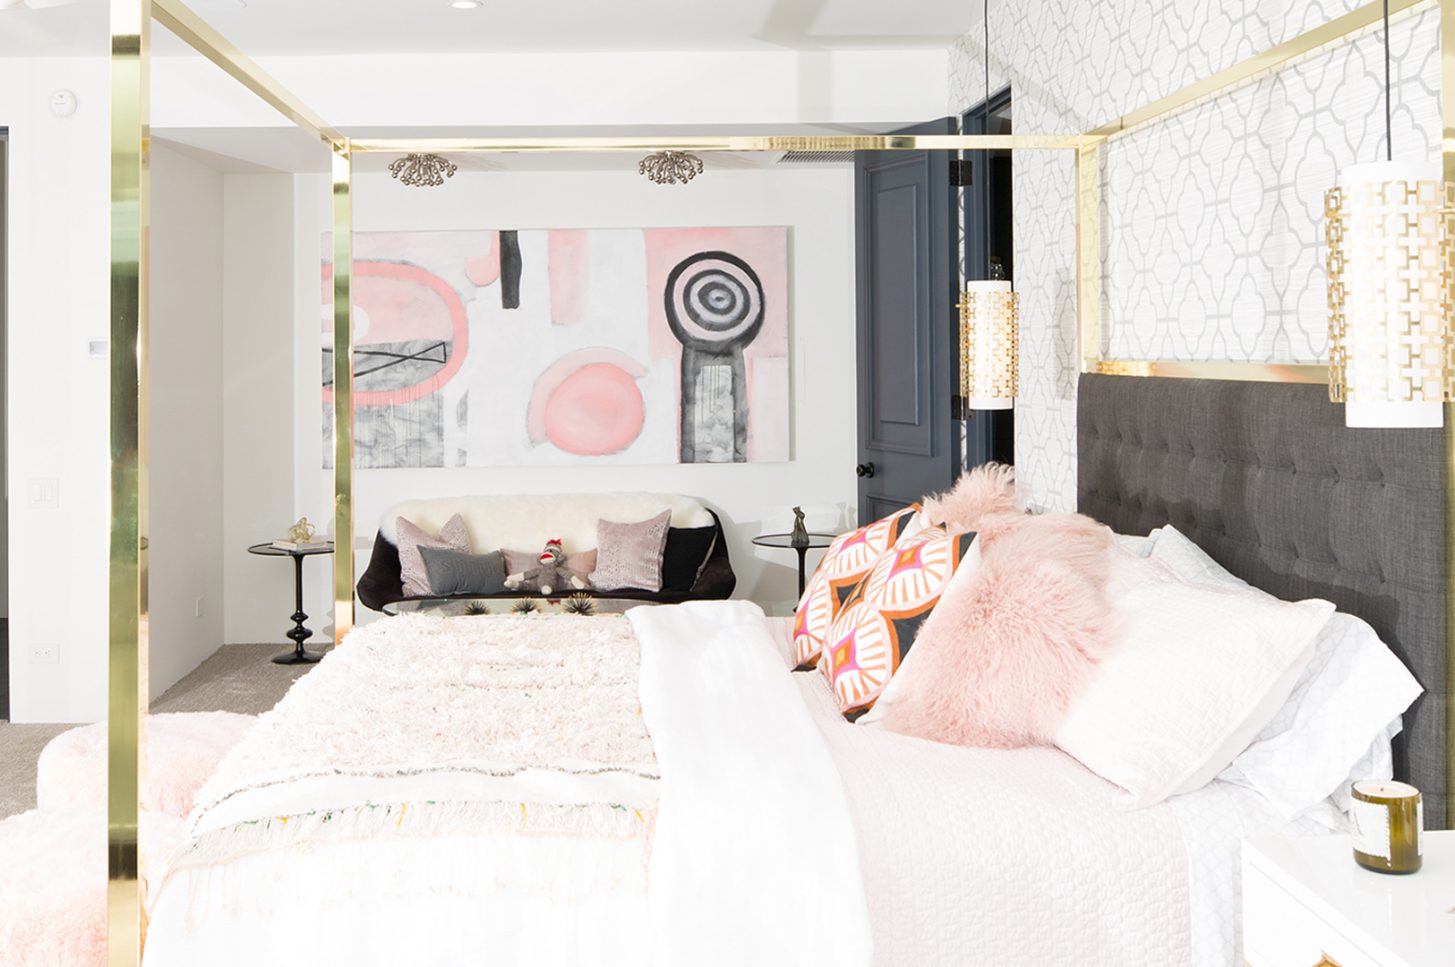 Table legs and kitchen details should emphasize shine with some gold accents or like this glamorous bed! And don’t be afraid to mix metals for a layered, designer touch! And rather than leather and tweeds, op’t for suedes and velvets. Rock n’ Roll, baby!